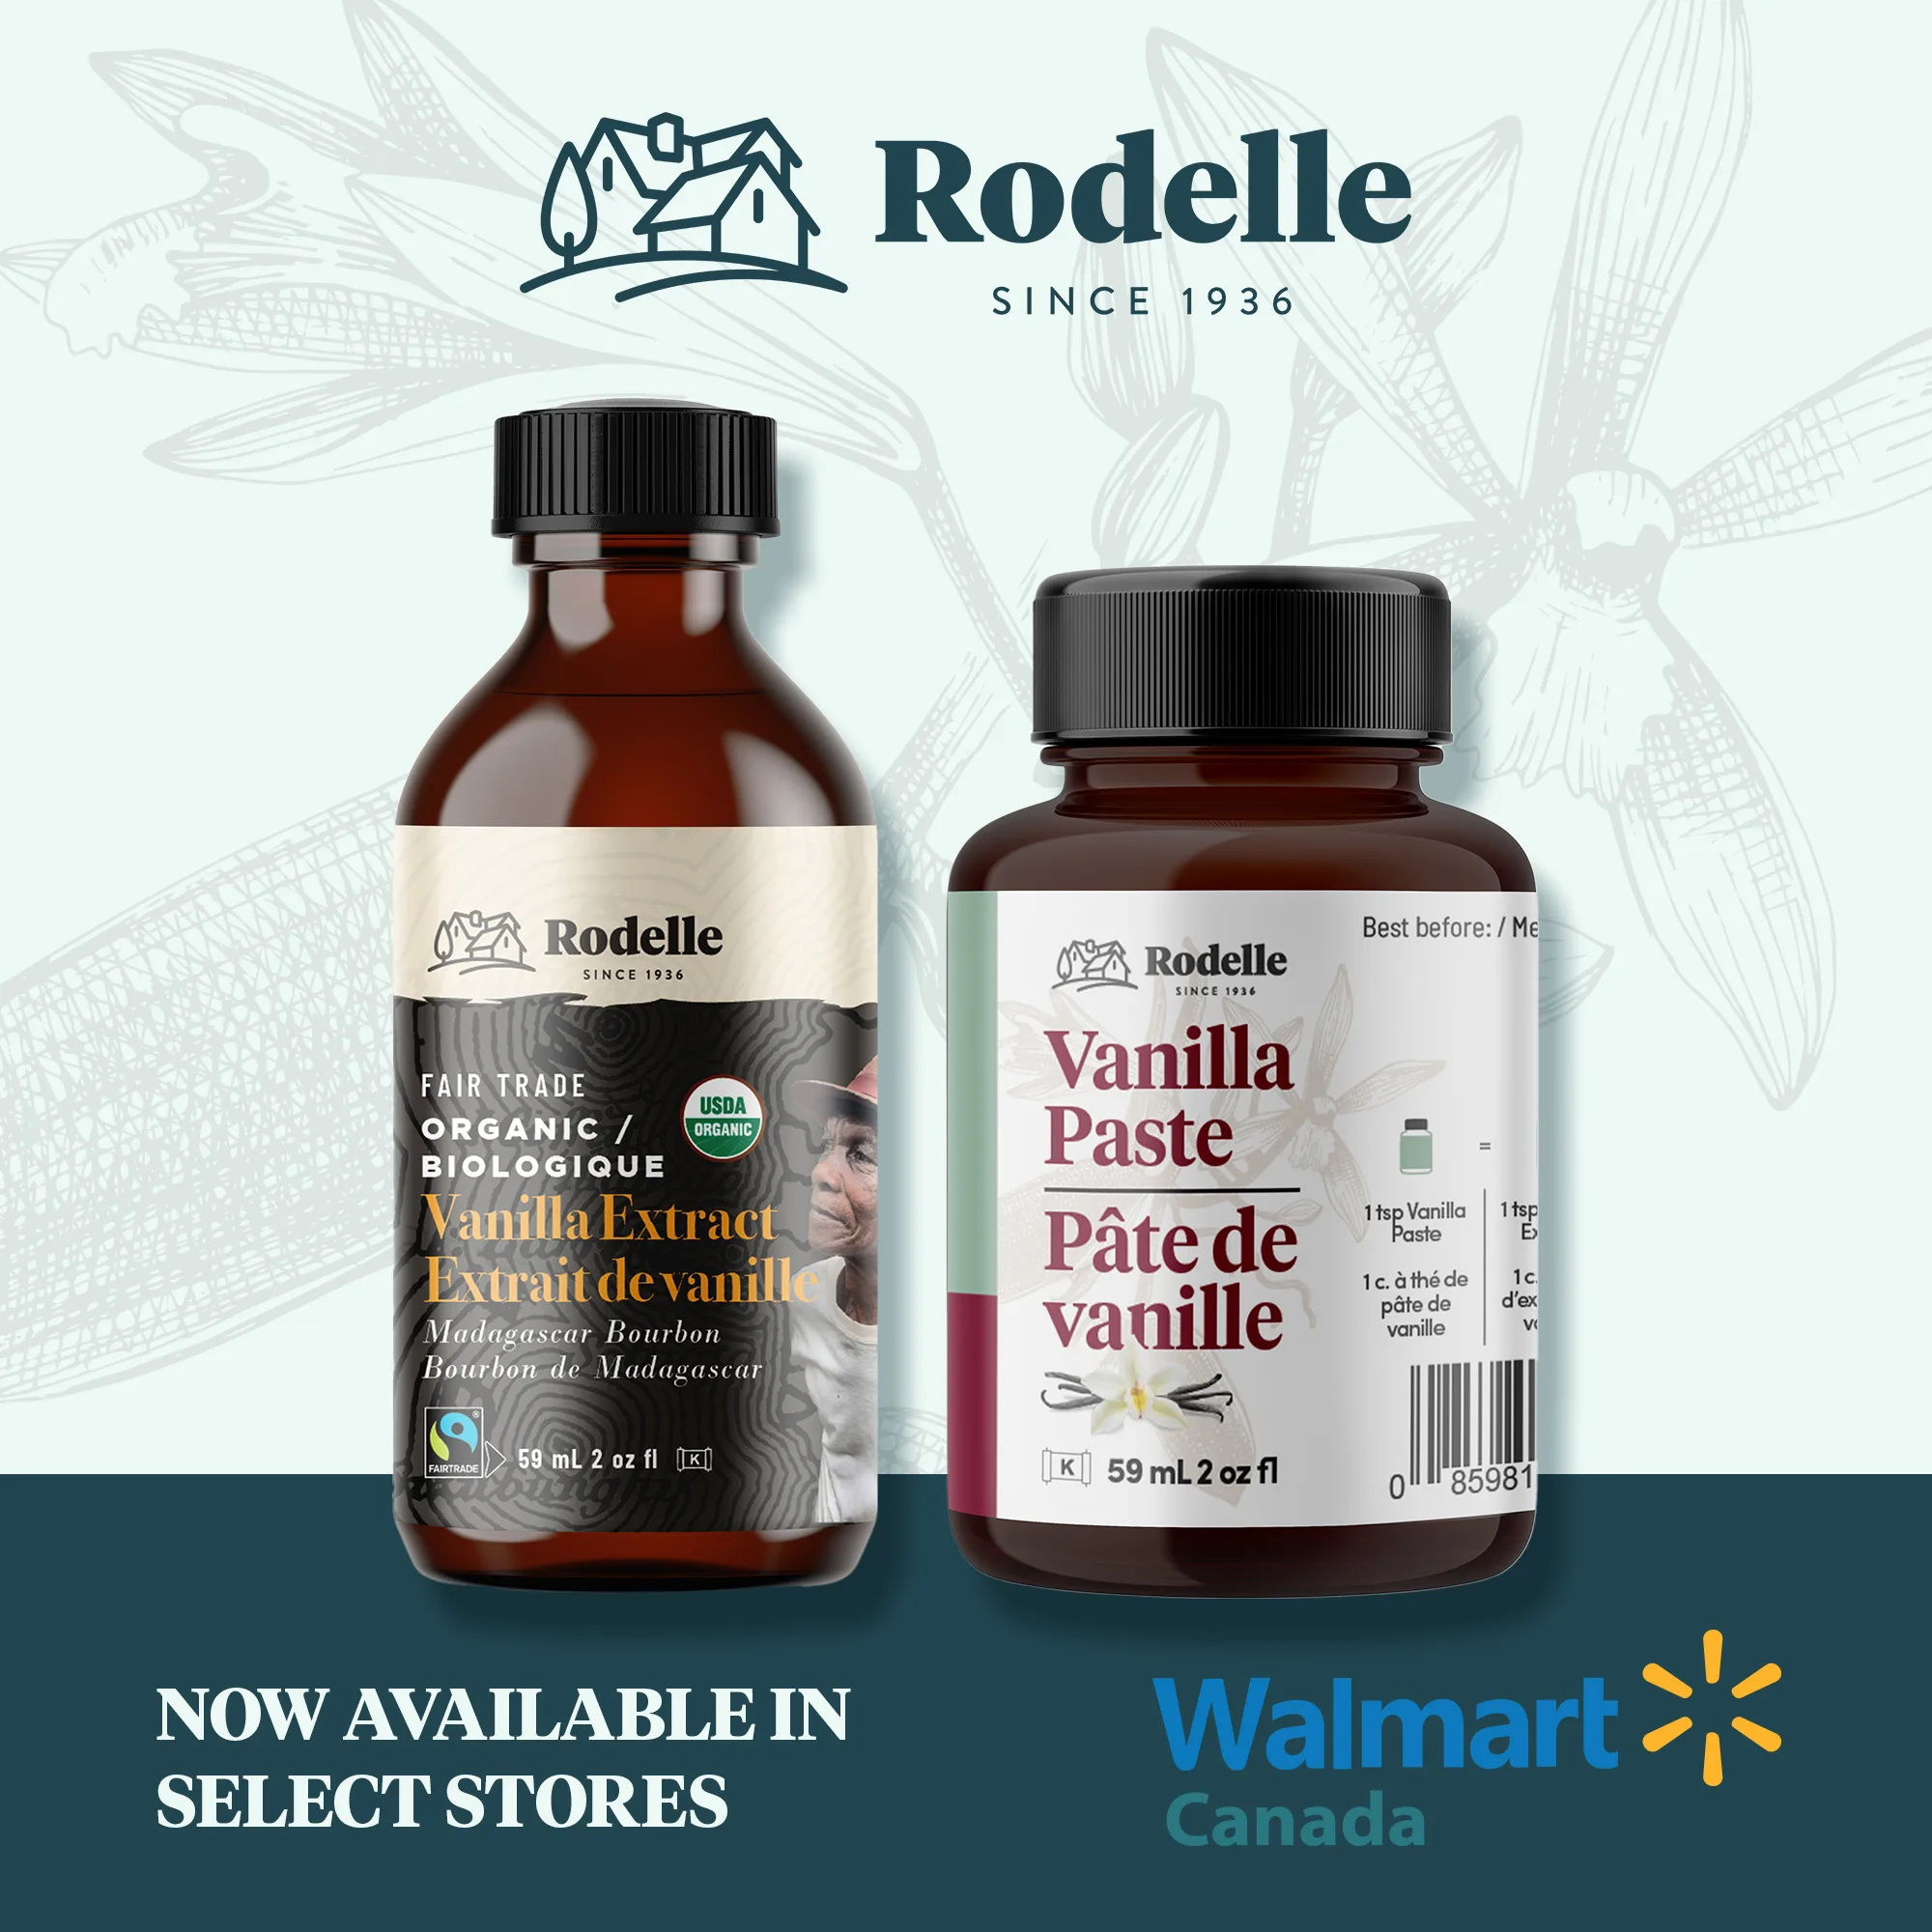 2 bottles of Rodelle product - vanilla paste and vanilla extract on background stating available in Walmart Canada